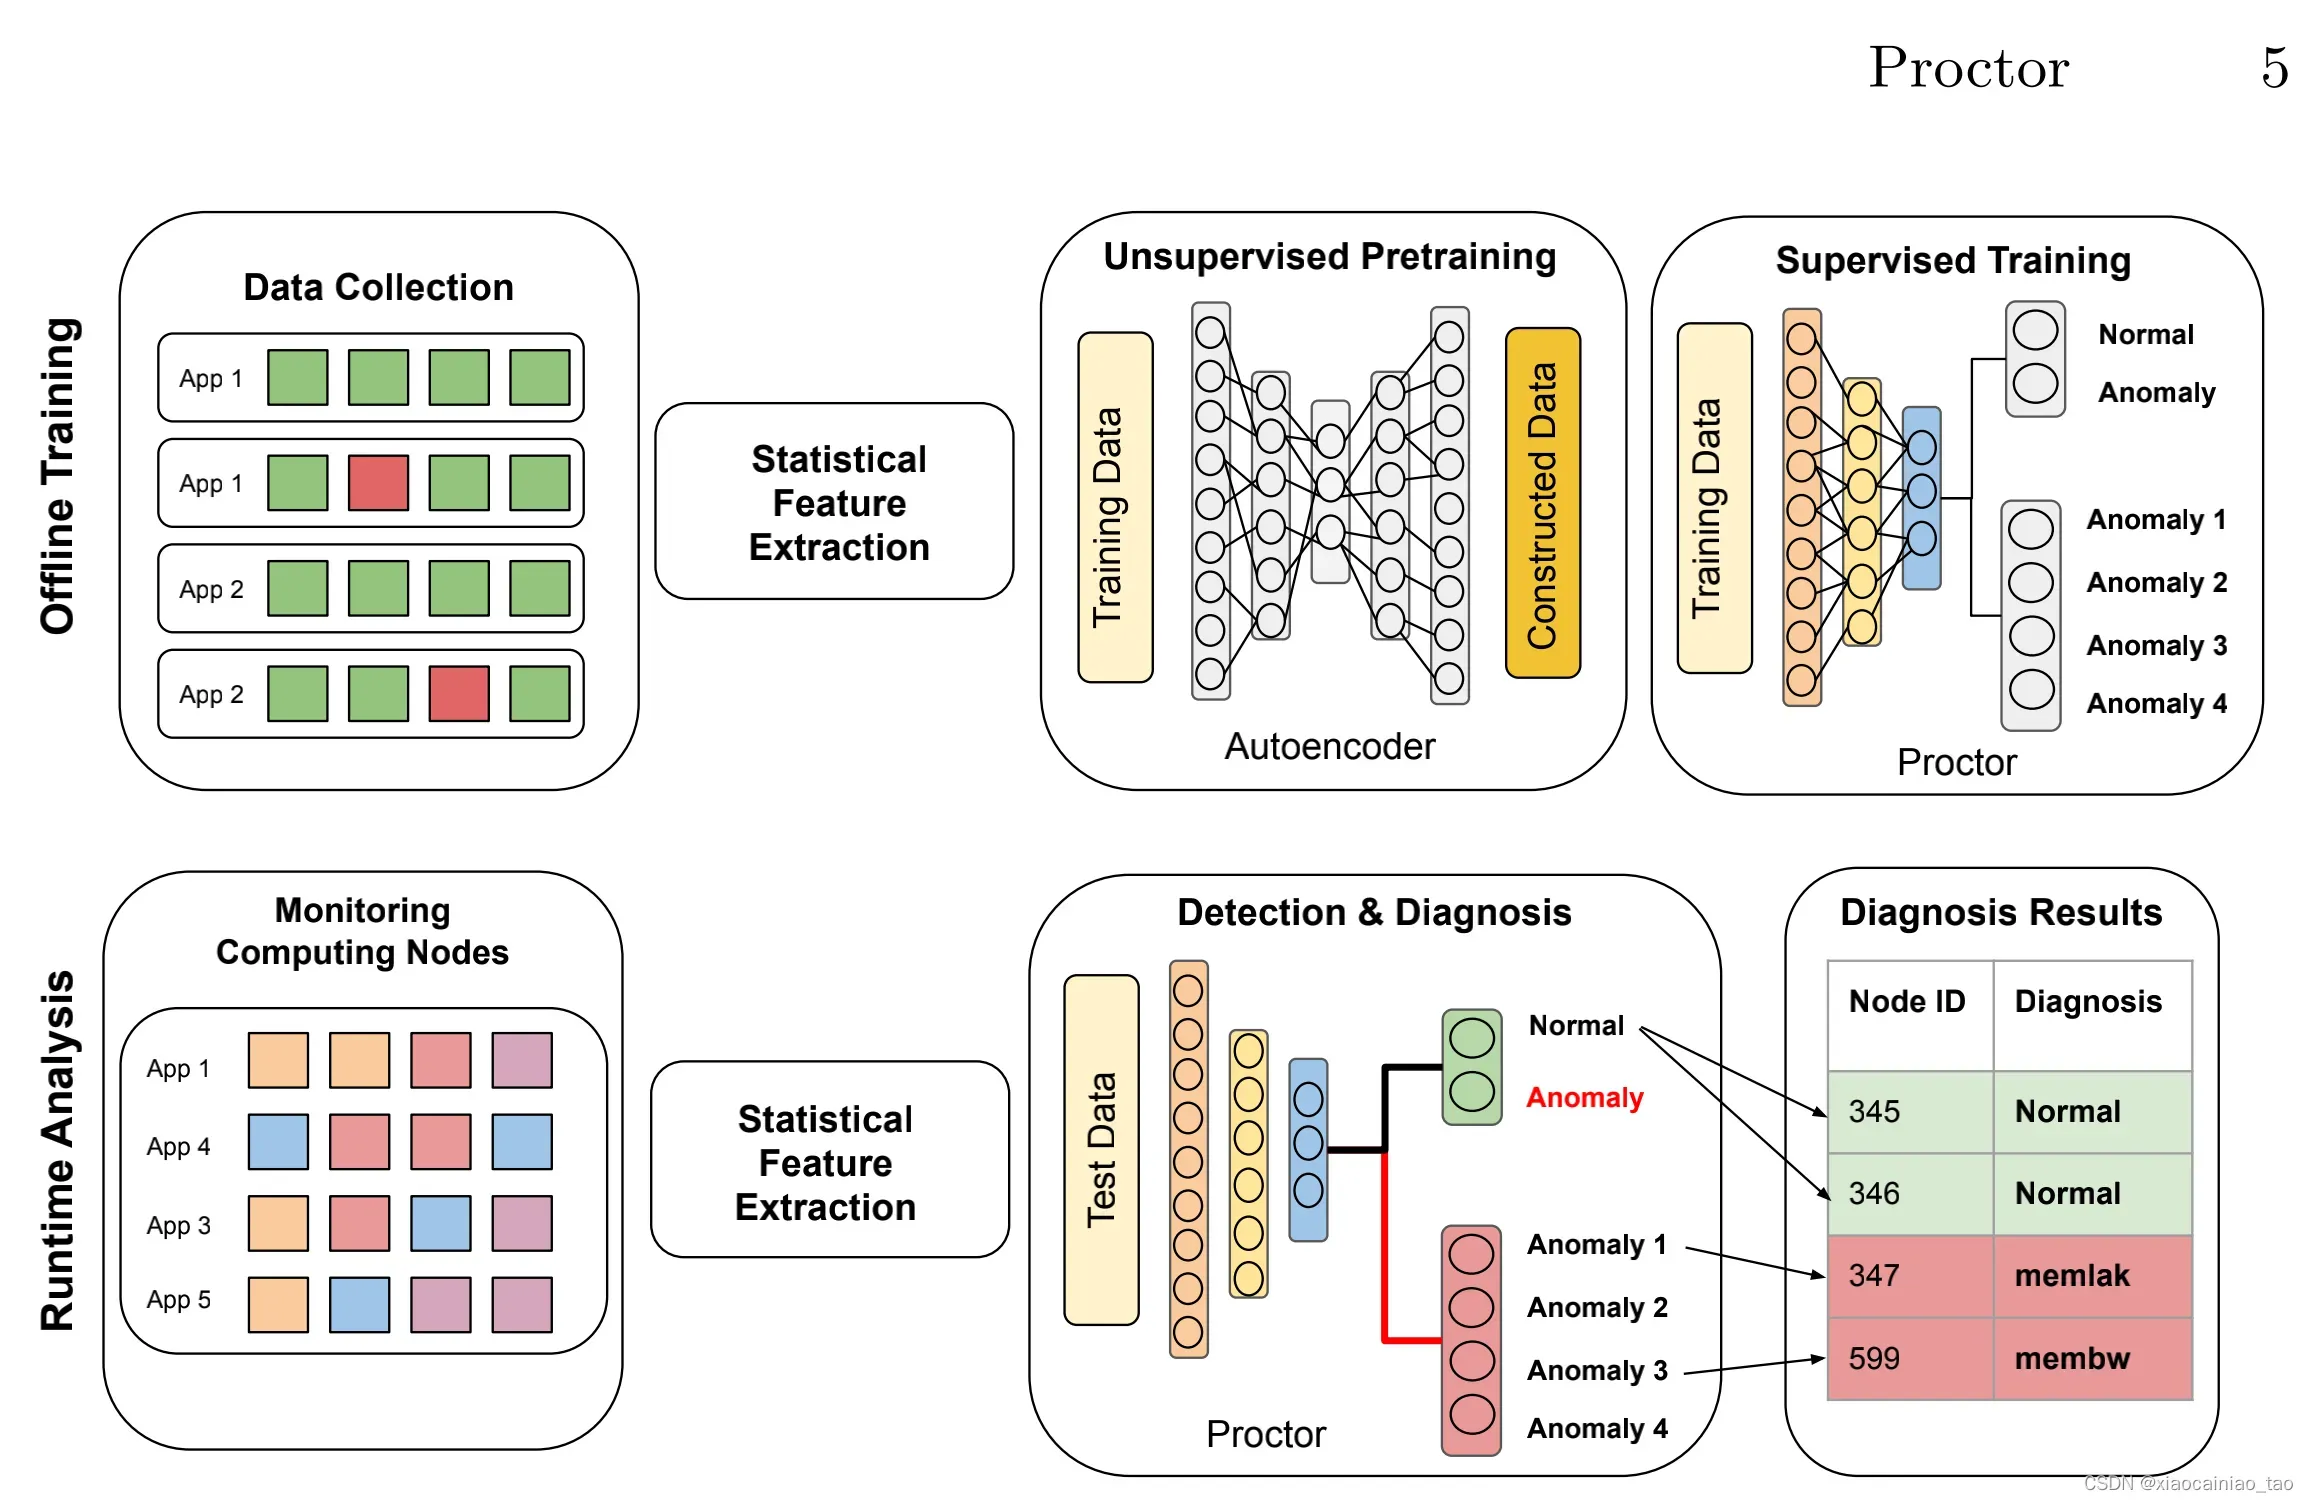 Proctor: A Semi-Supervised PerformanceAnomaly Diagnosis Framework forProduction HPC Systems